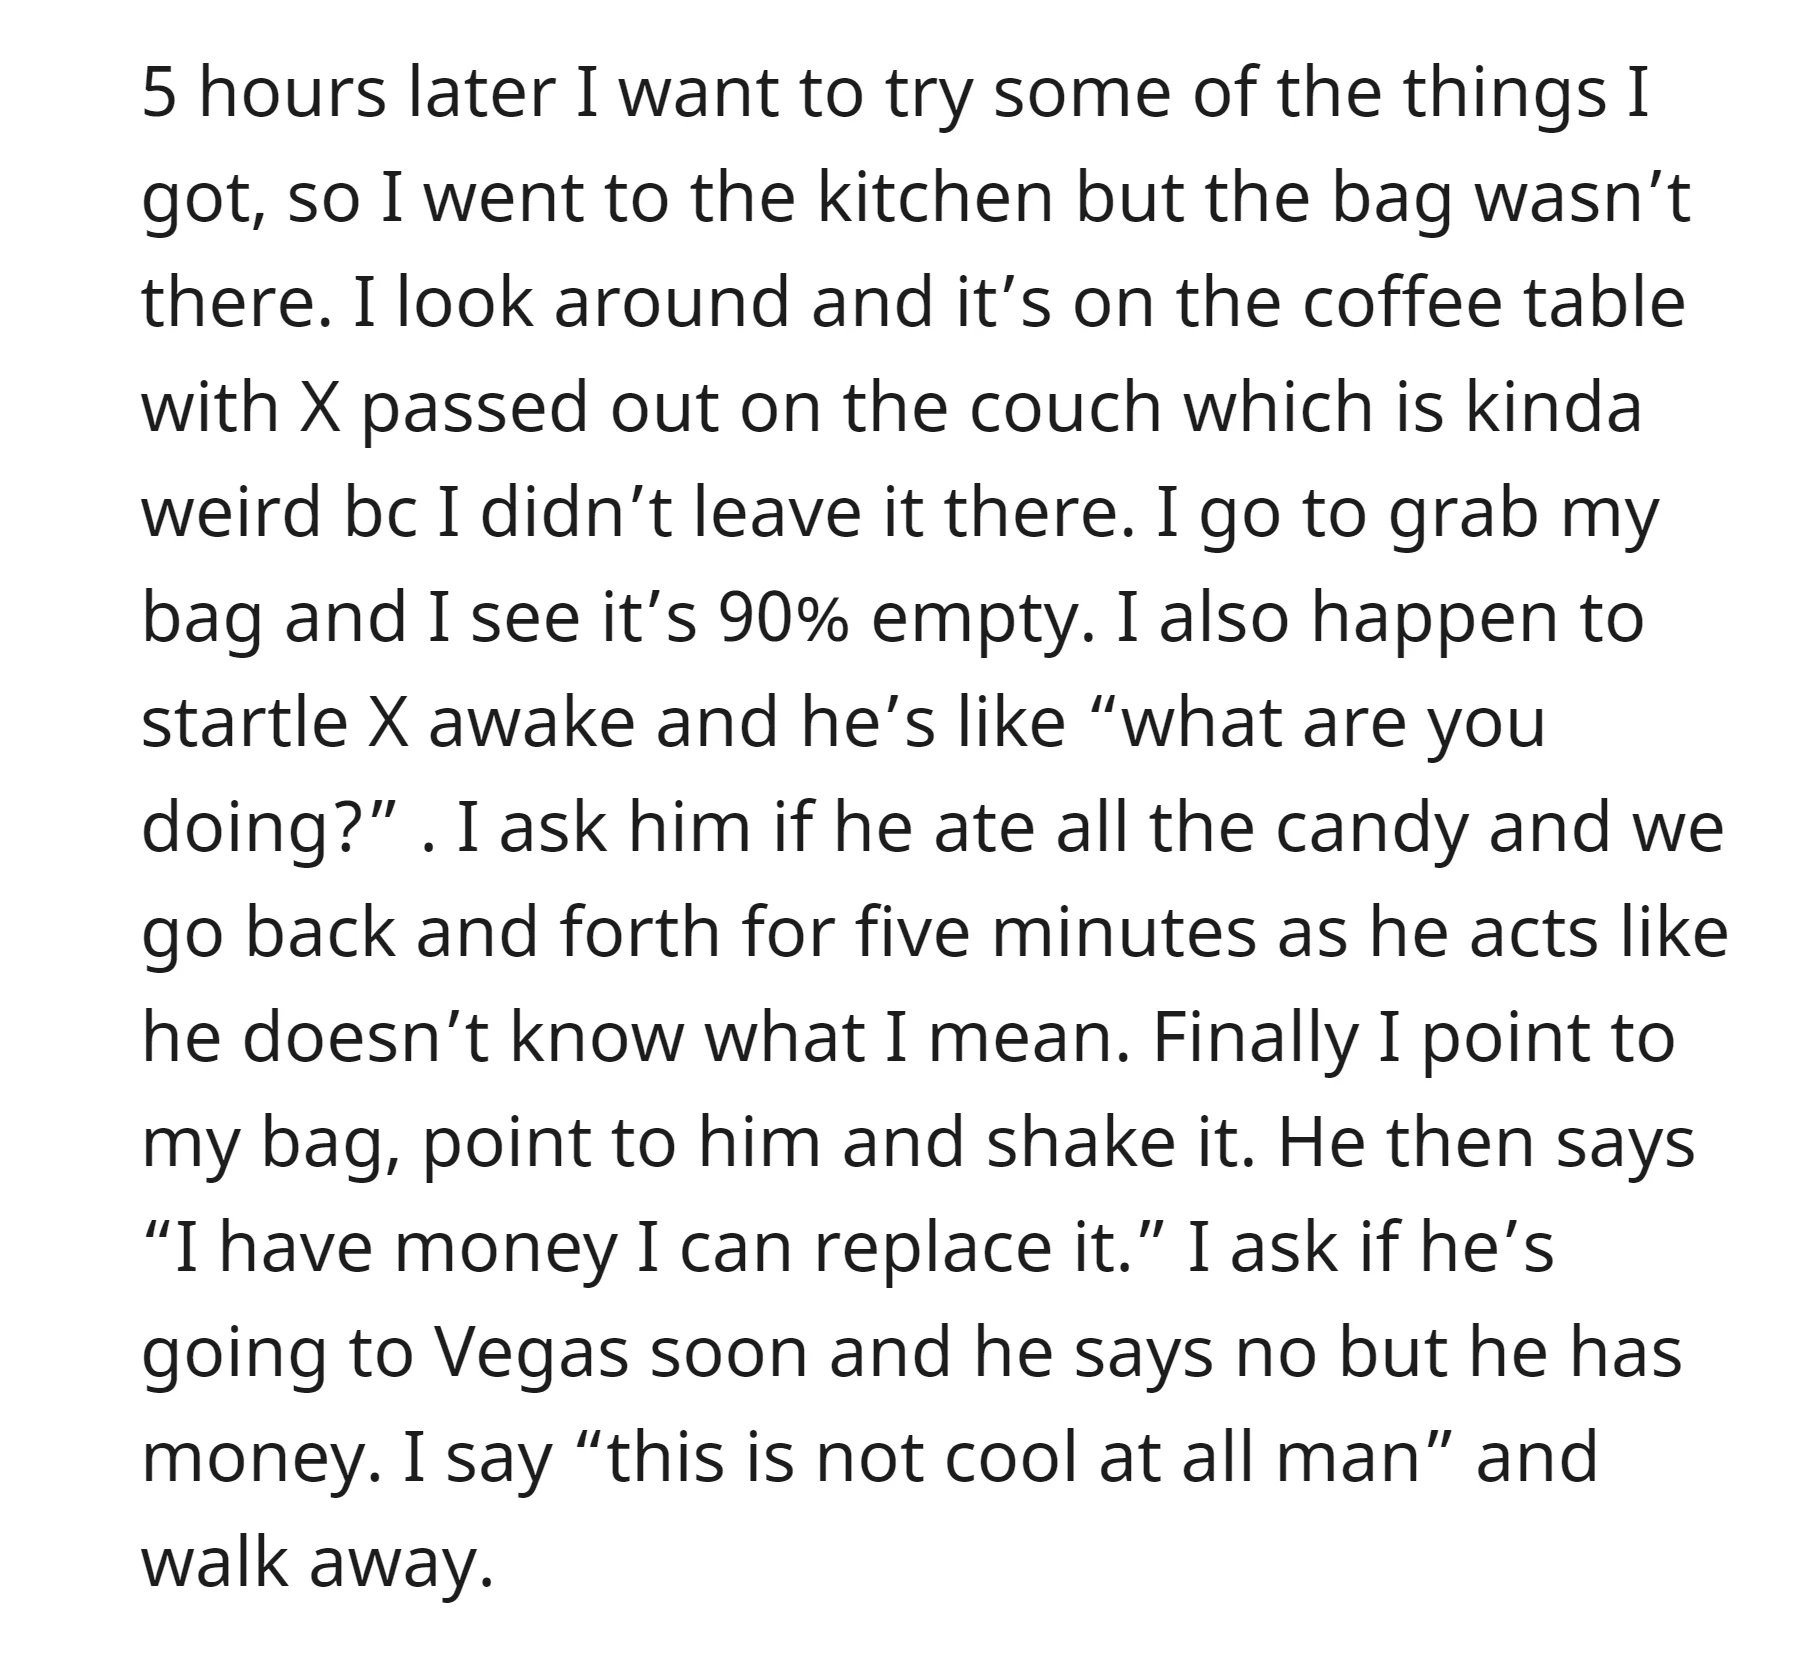 Five hours later, when the OP found her candy bag 90% empty on the coffee table with X passed out, she confronted him about it